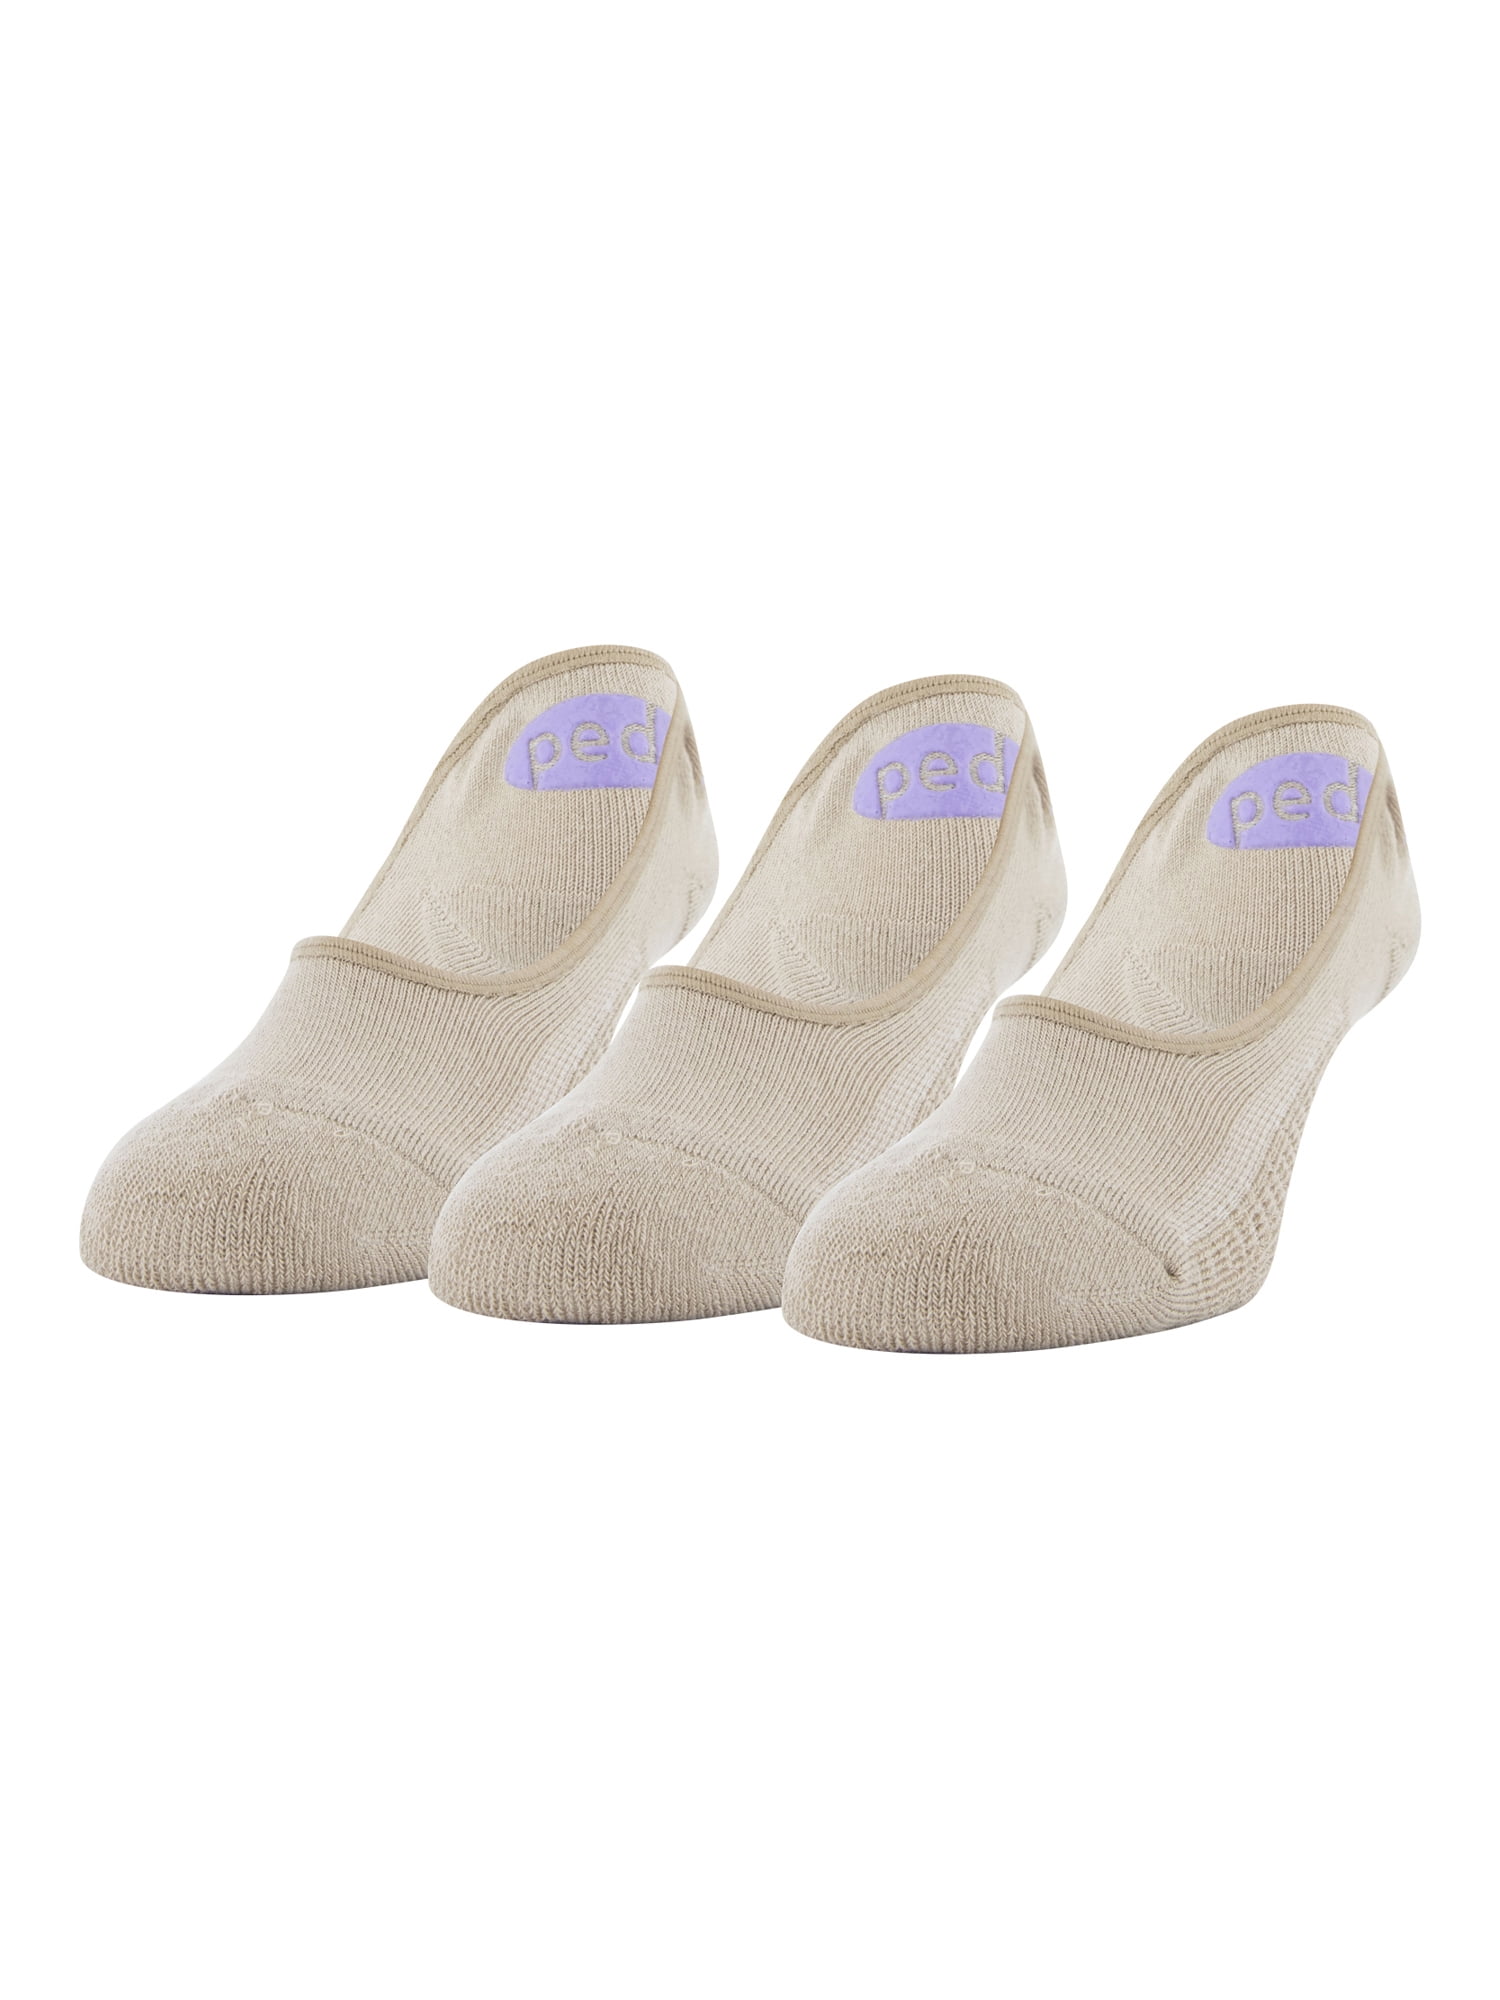 Peds Women's Cushion Low Cut No Show Liners, Shoe Sizes 5-10 and 8-12 ...